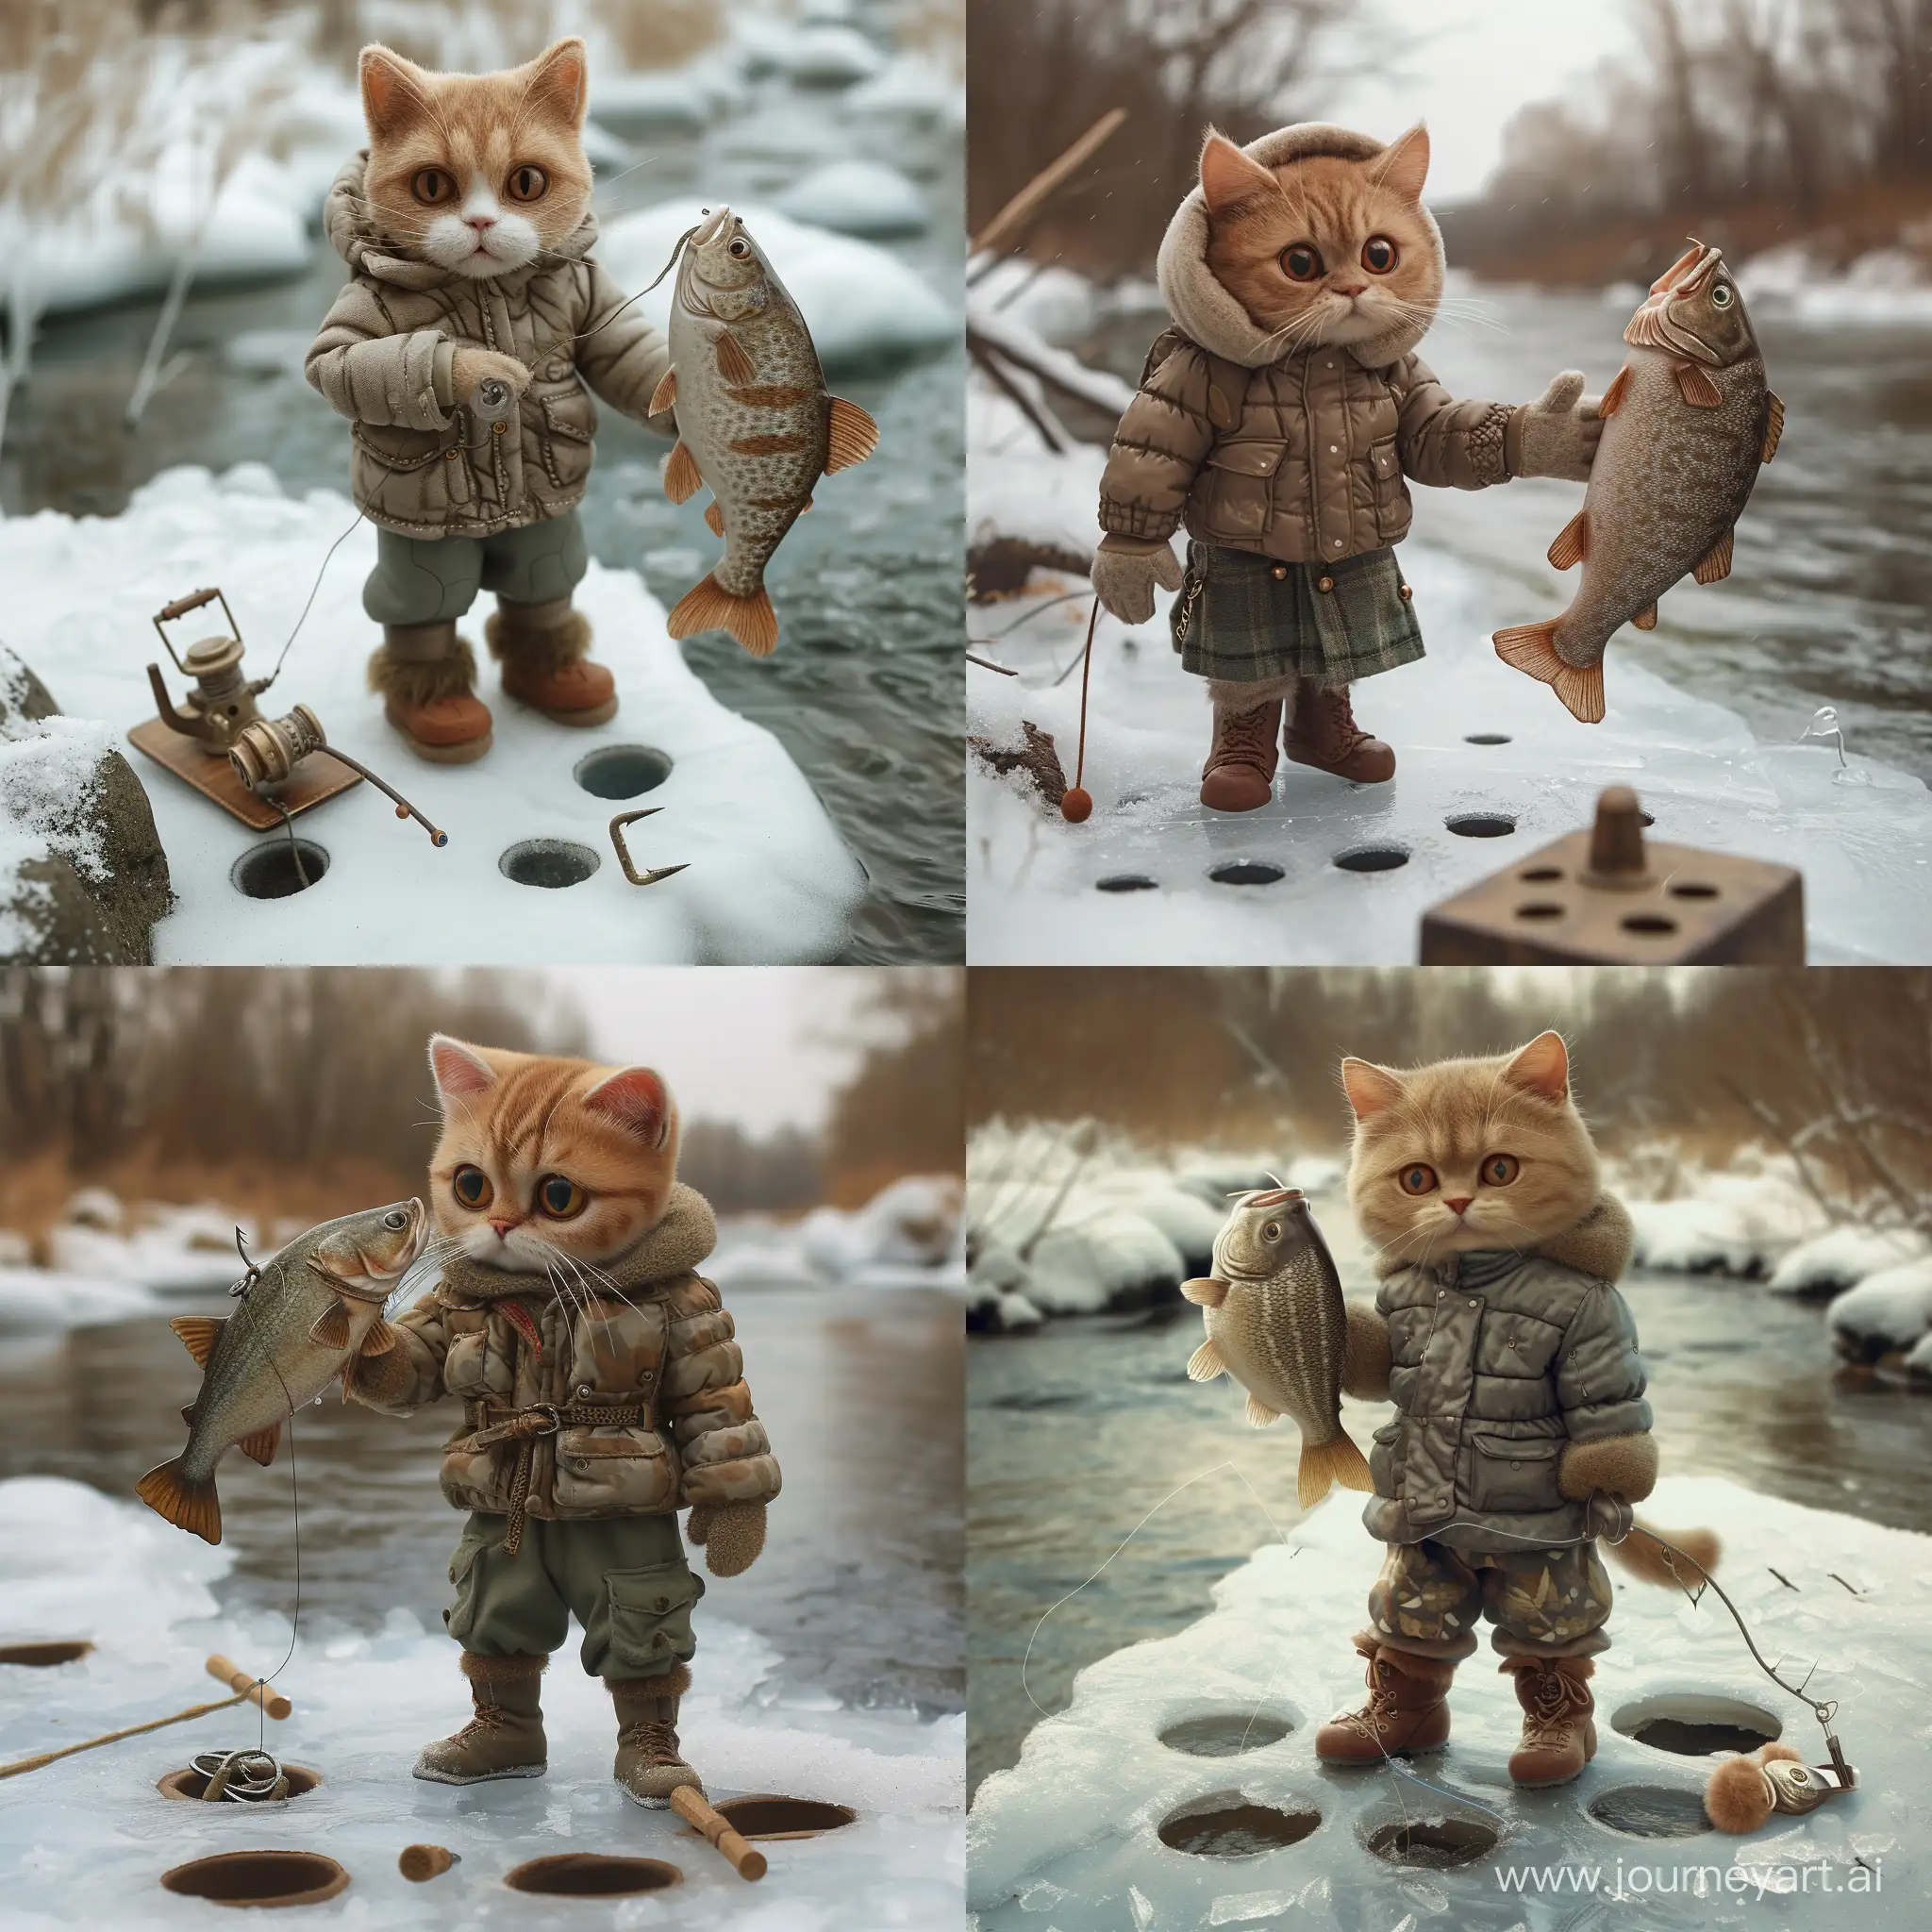 Winter. The action takes place on an ice-covered river. A small scottish cat, expressive eyes, dressed in a padded jacket, trousers and felt boots stands on the ice in the middle of the river and holds a huge fish in his hand. There are holes drilled near him, through which he fished from under the ice, full pose, photo